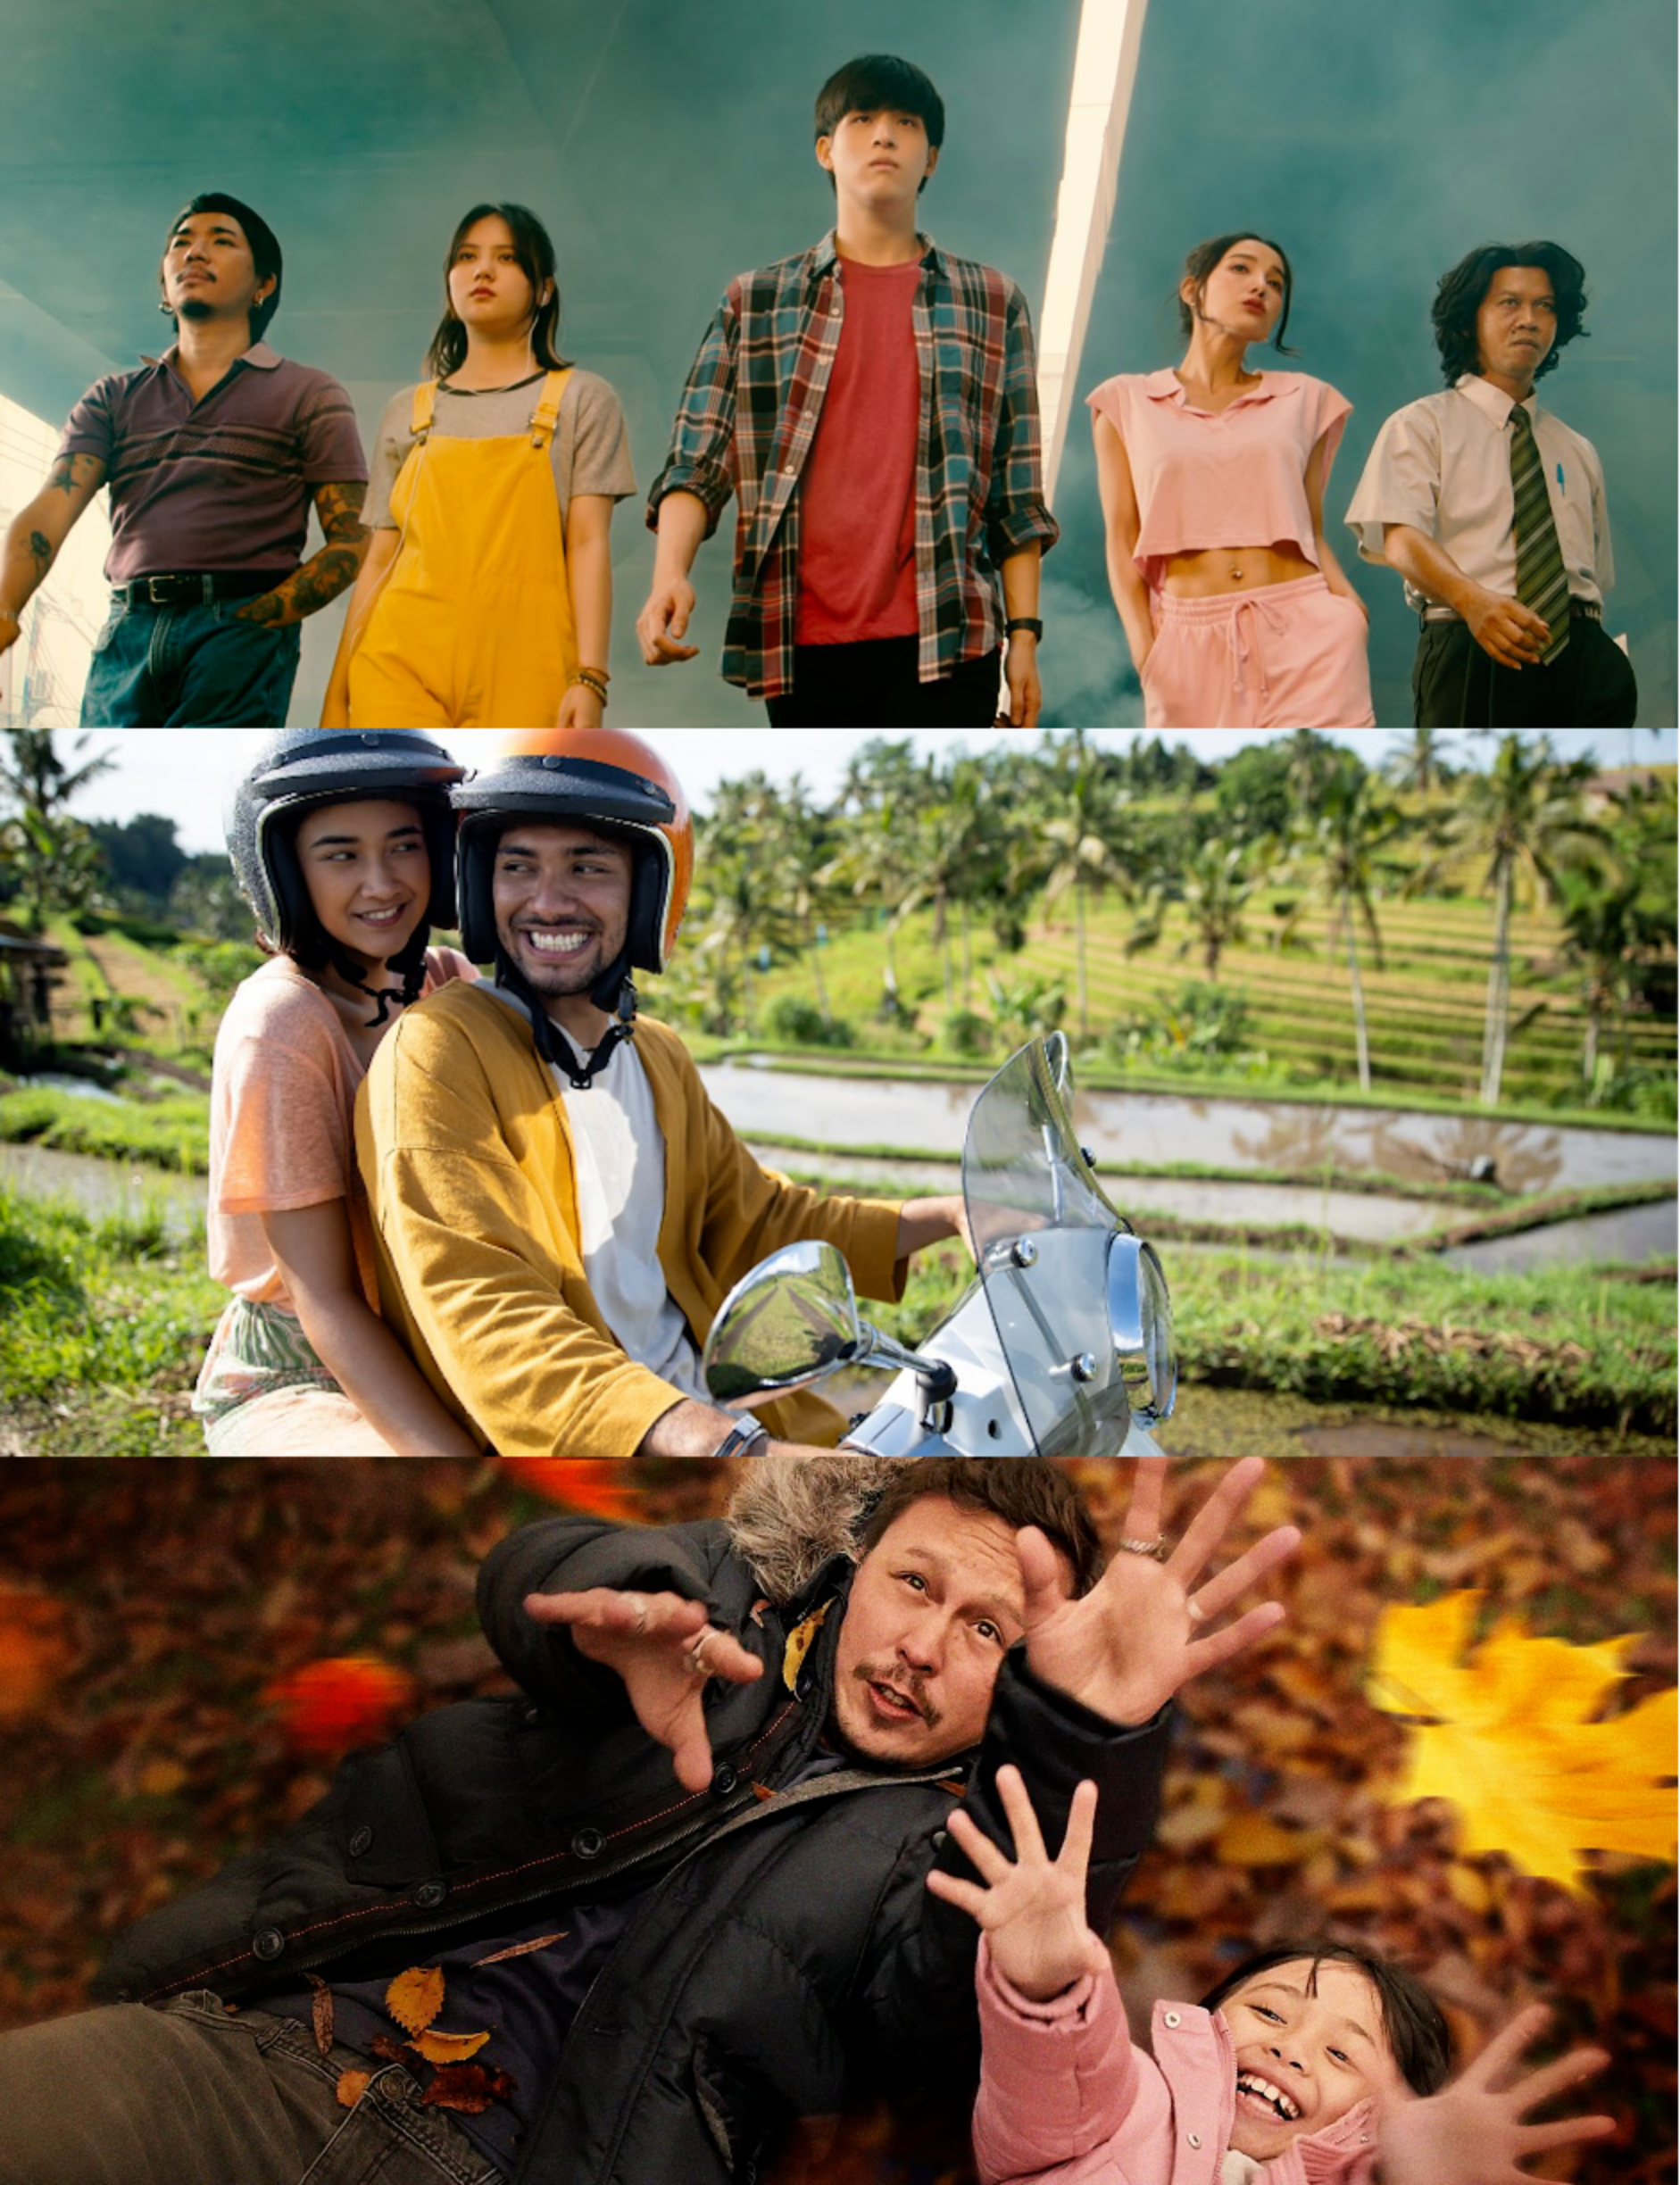 It’s a Wrap!  Celebrate the Holidays With Homegrown Southeast Asian Stories on Netflix